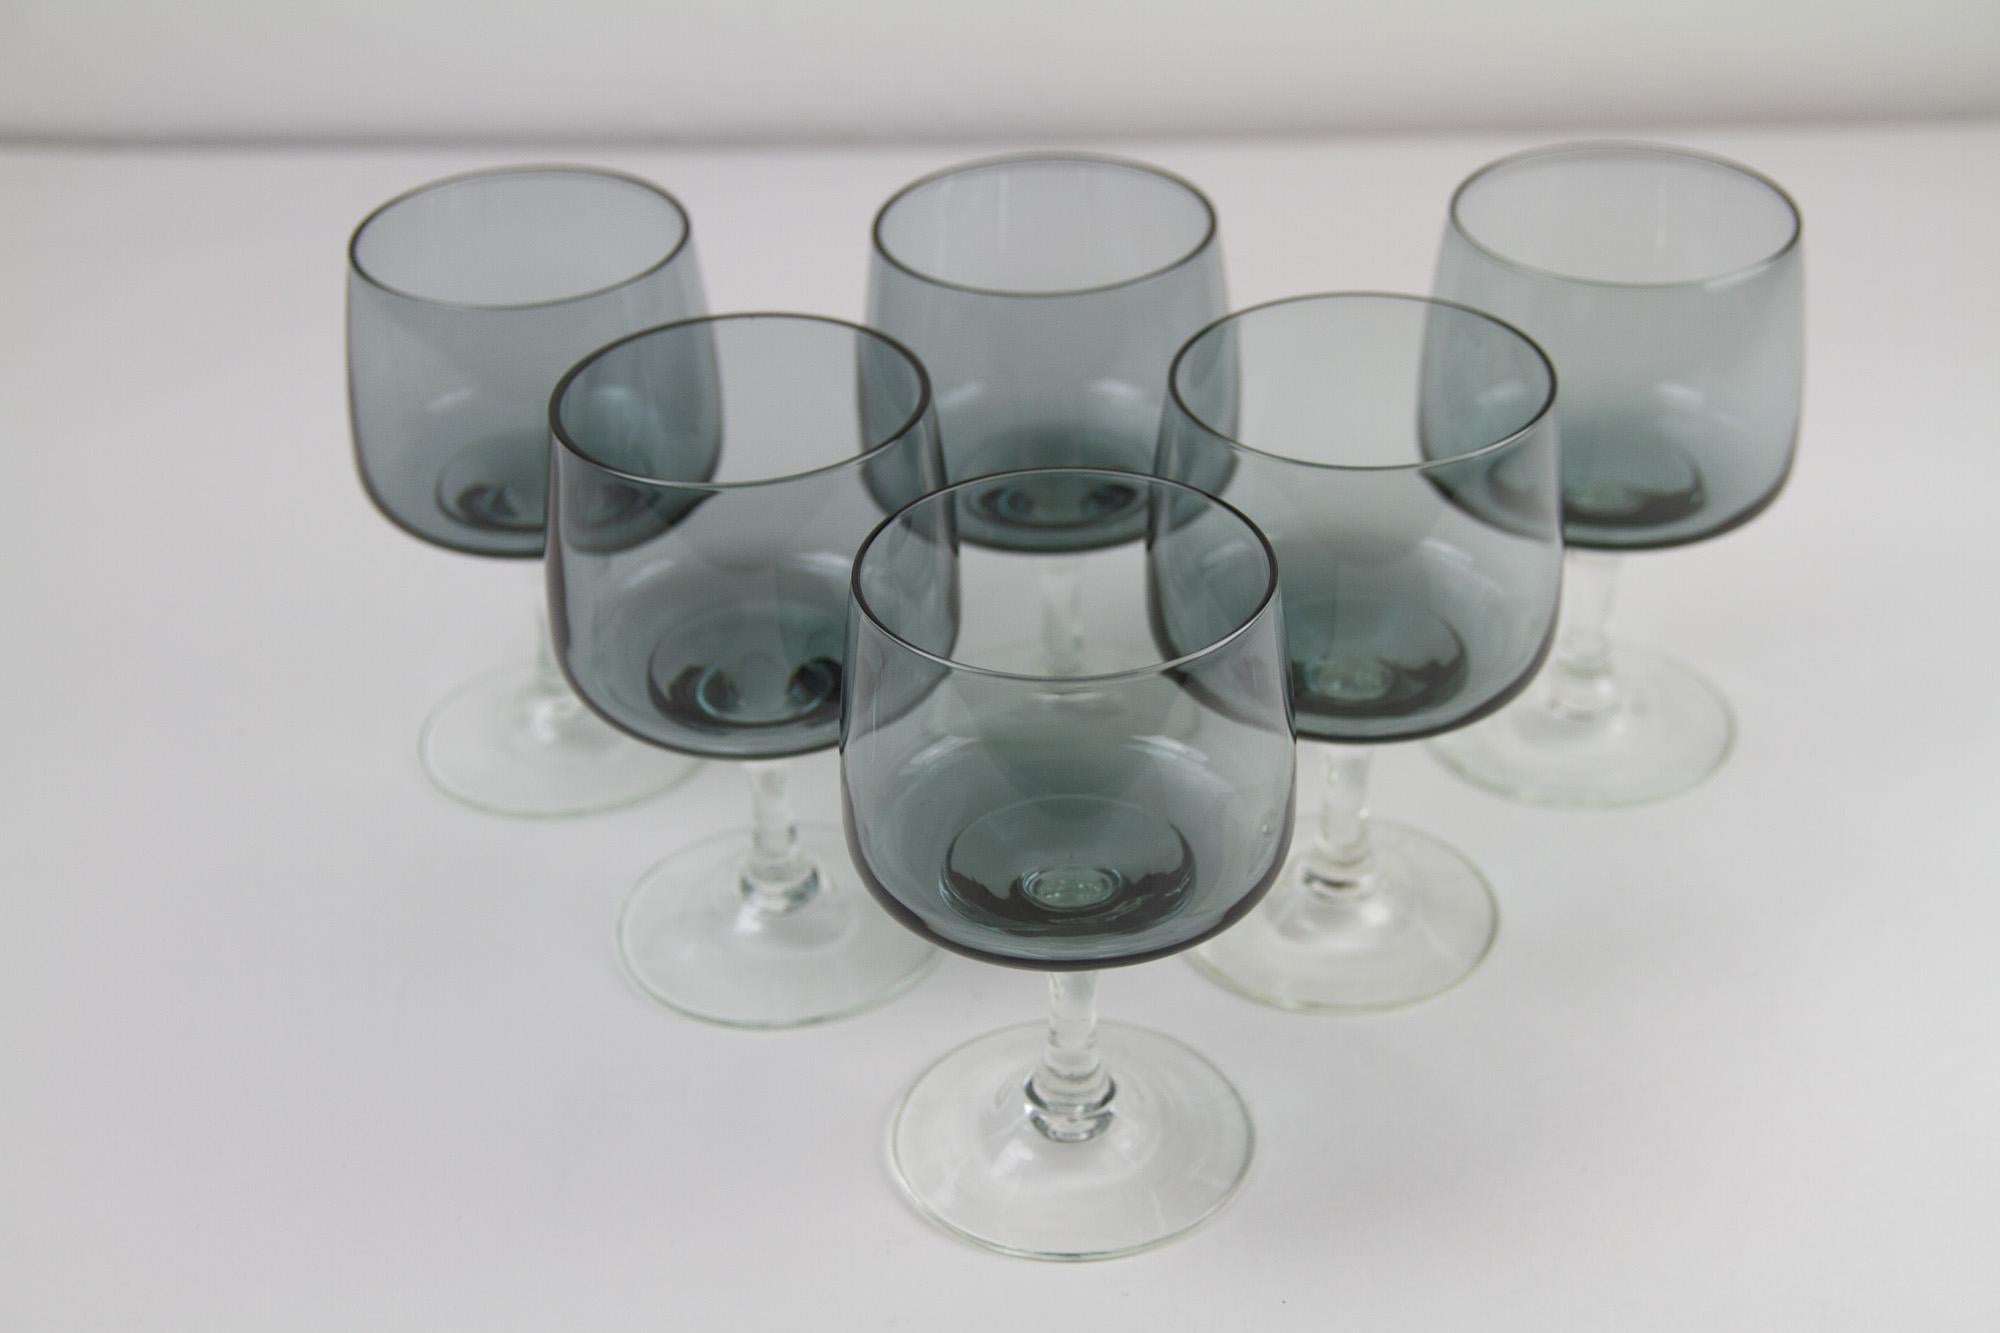 Vintage Danish Holmegaard Atlantic Red Wine Glasses, 1960s. Set of 6.
Set of 6 beautiful hand-blown vintage drinking glasses from Danish glasswork Holmegaard designed by Per Lütken in 1962. These were only manufactured between 1962 and 1975. 
The